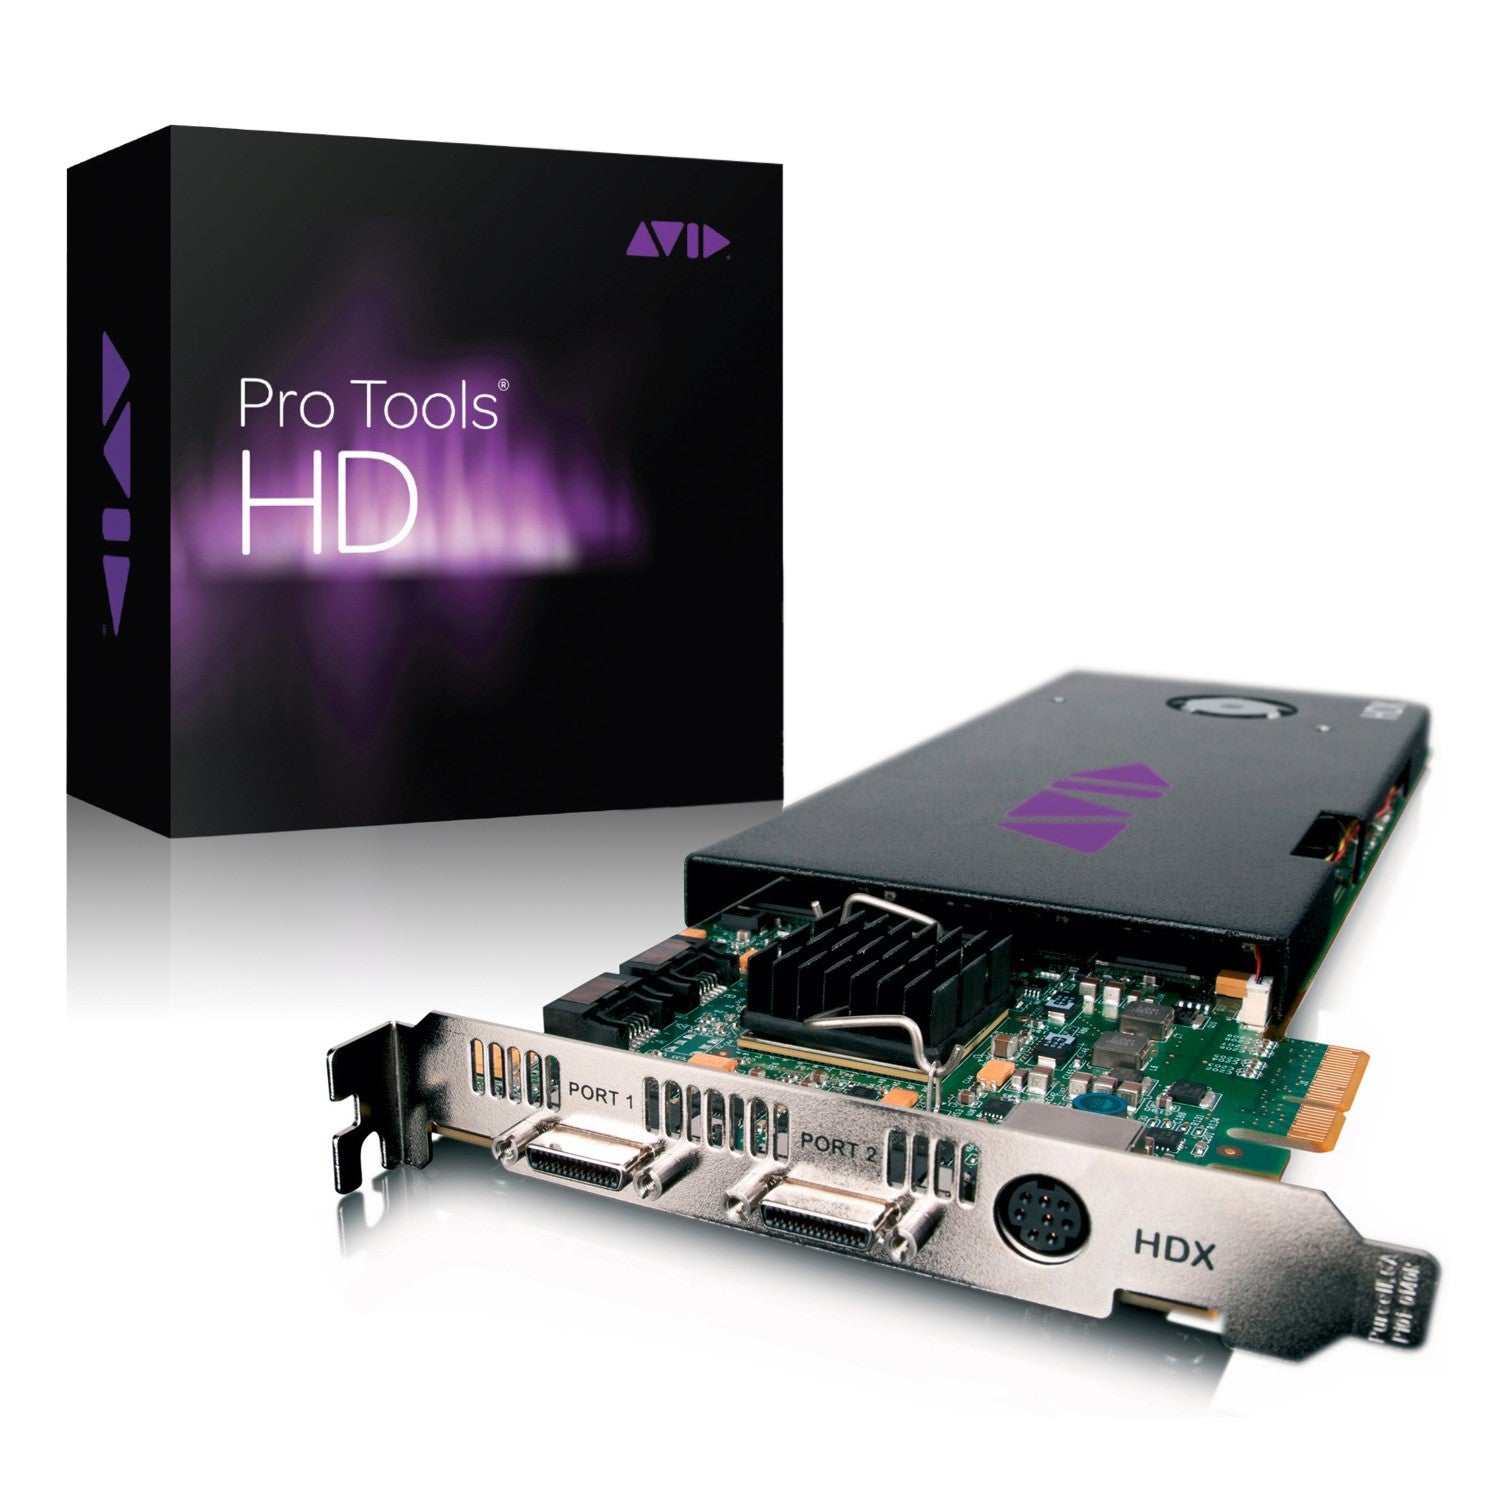 Avid Pro Tools HDX Core with Pro Tools Ultimate Software